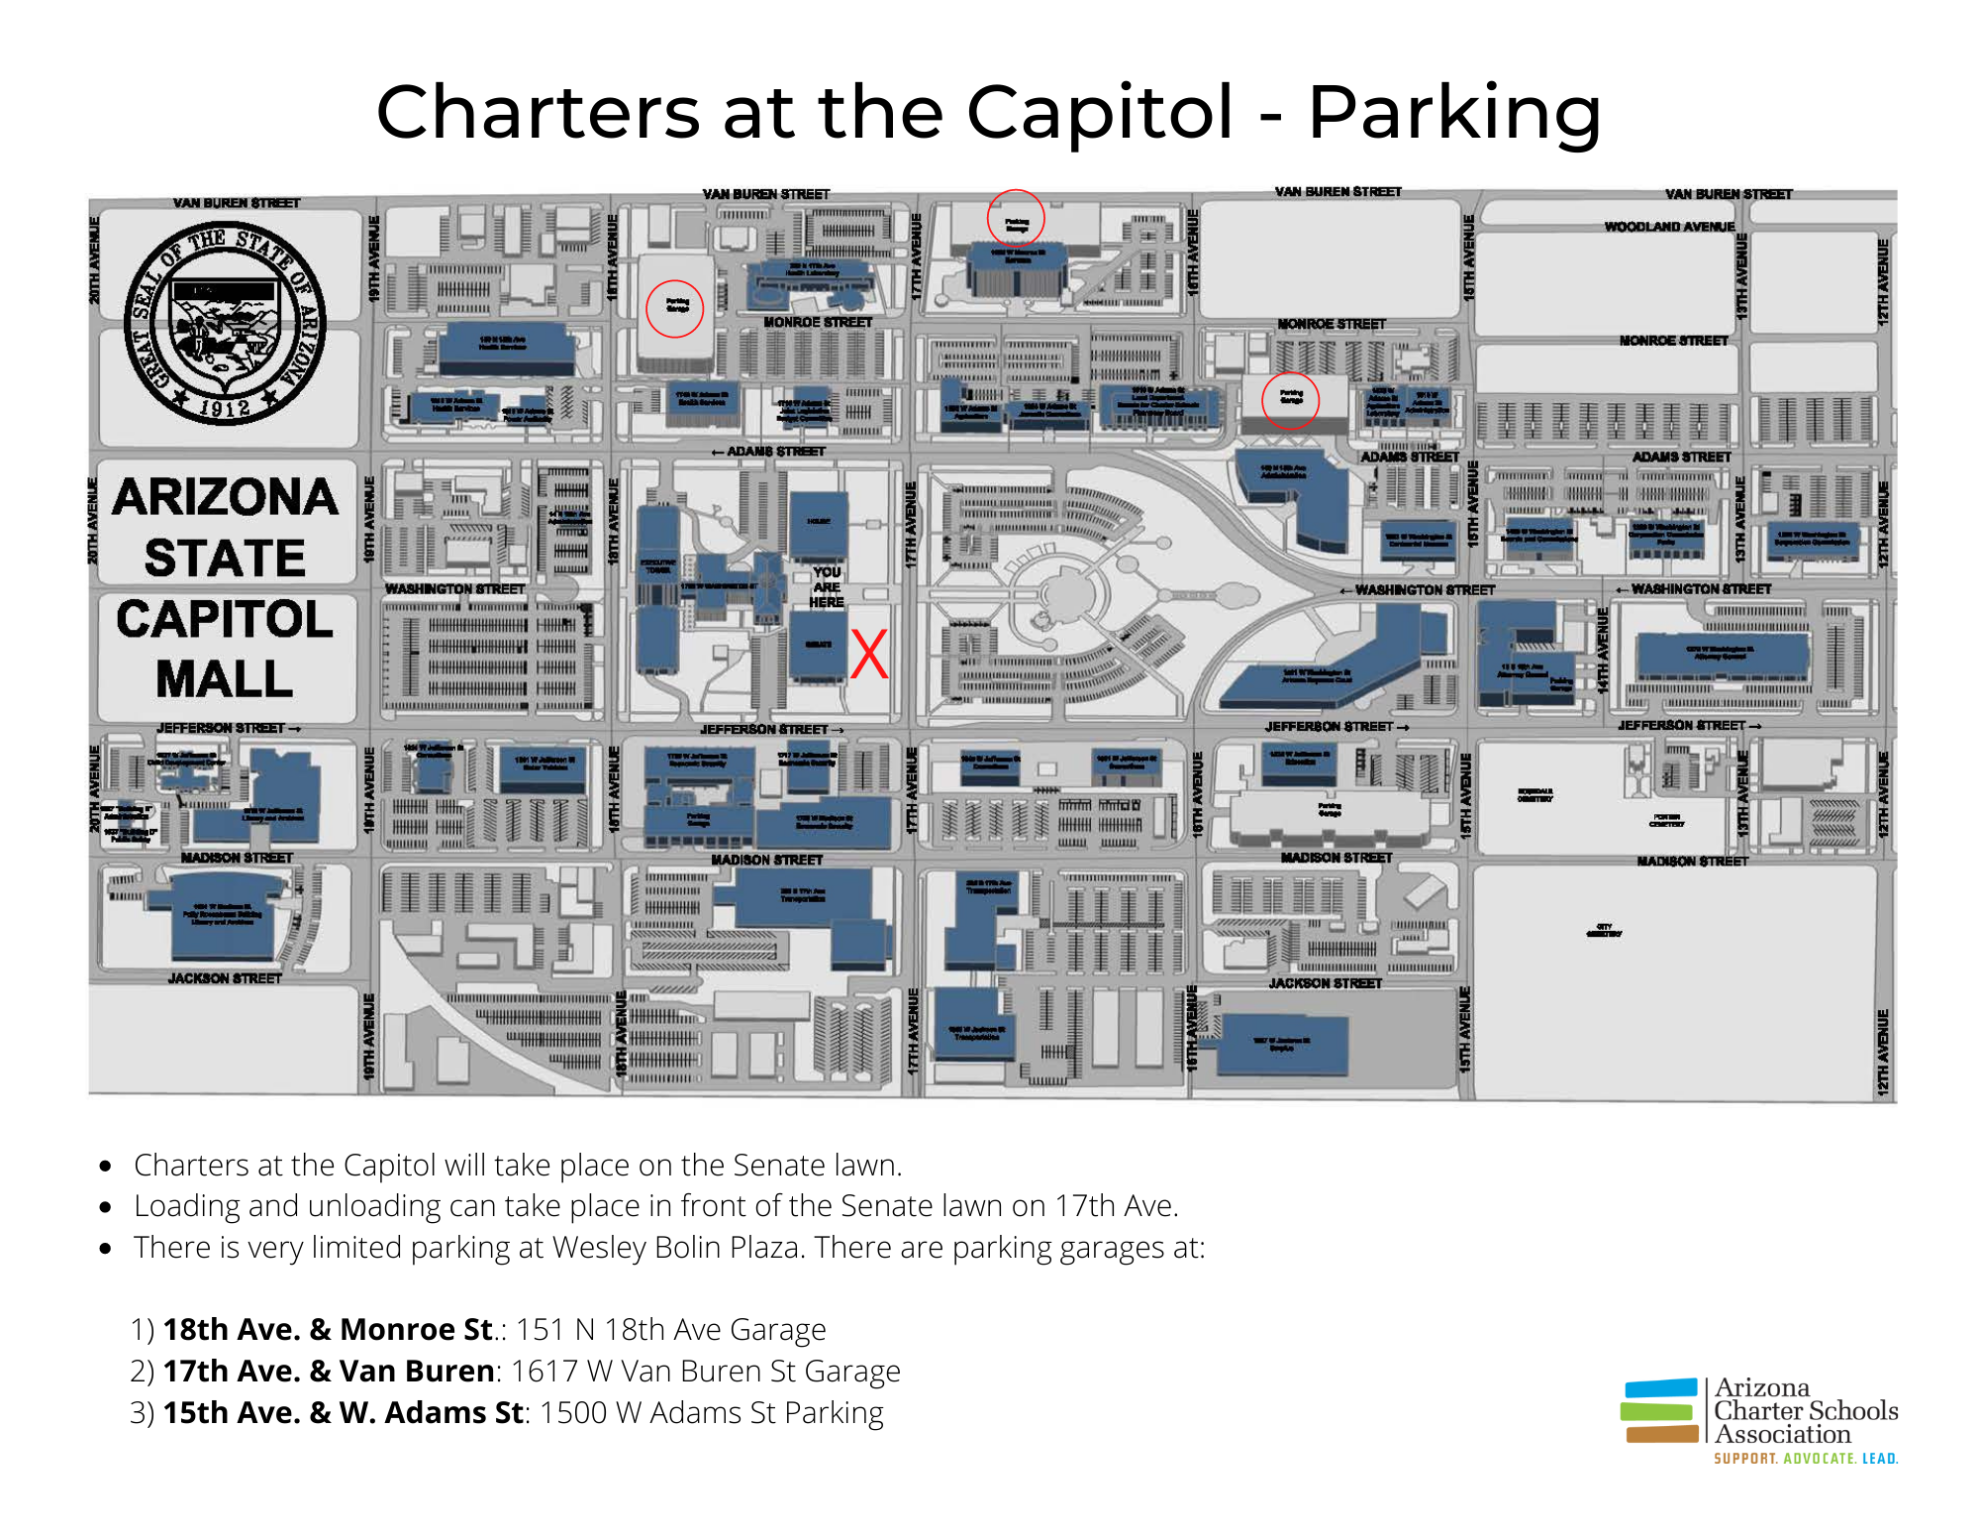 Charters at the Capitol parking map